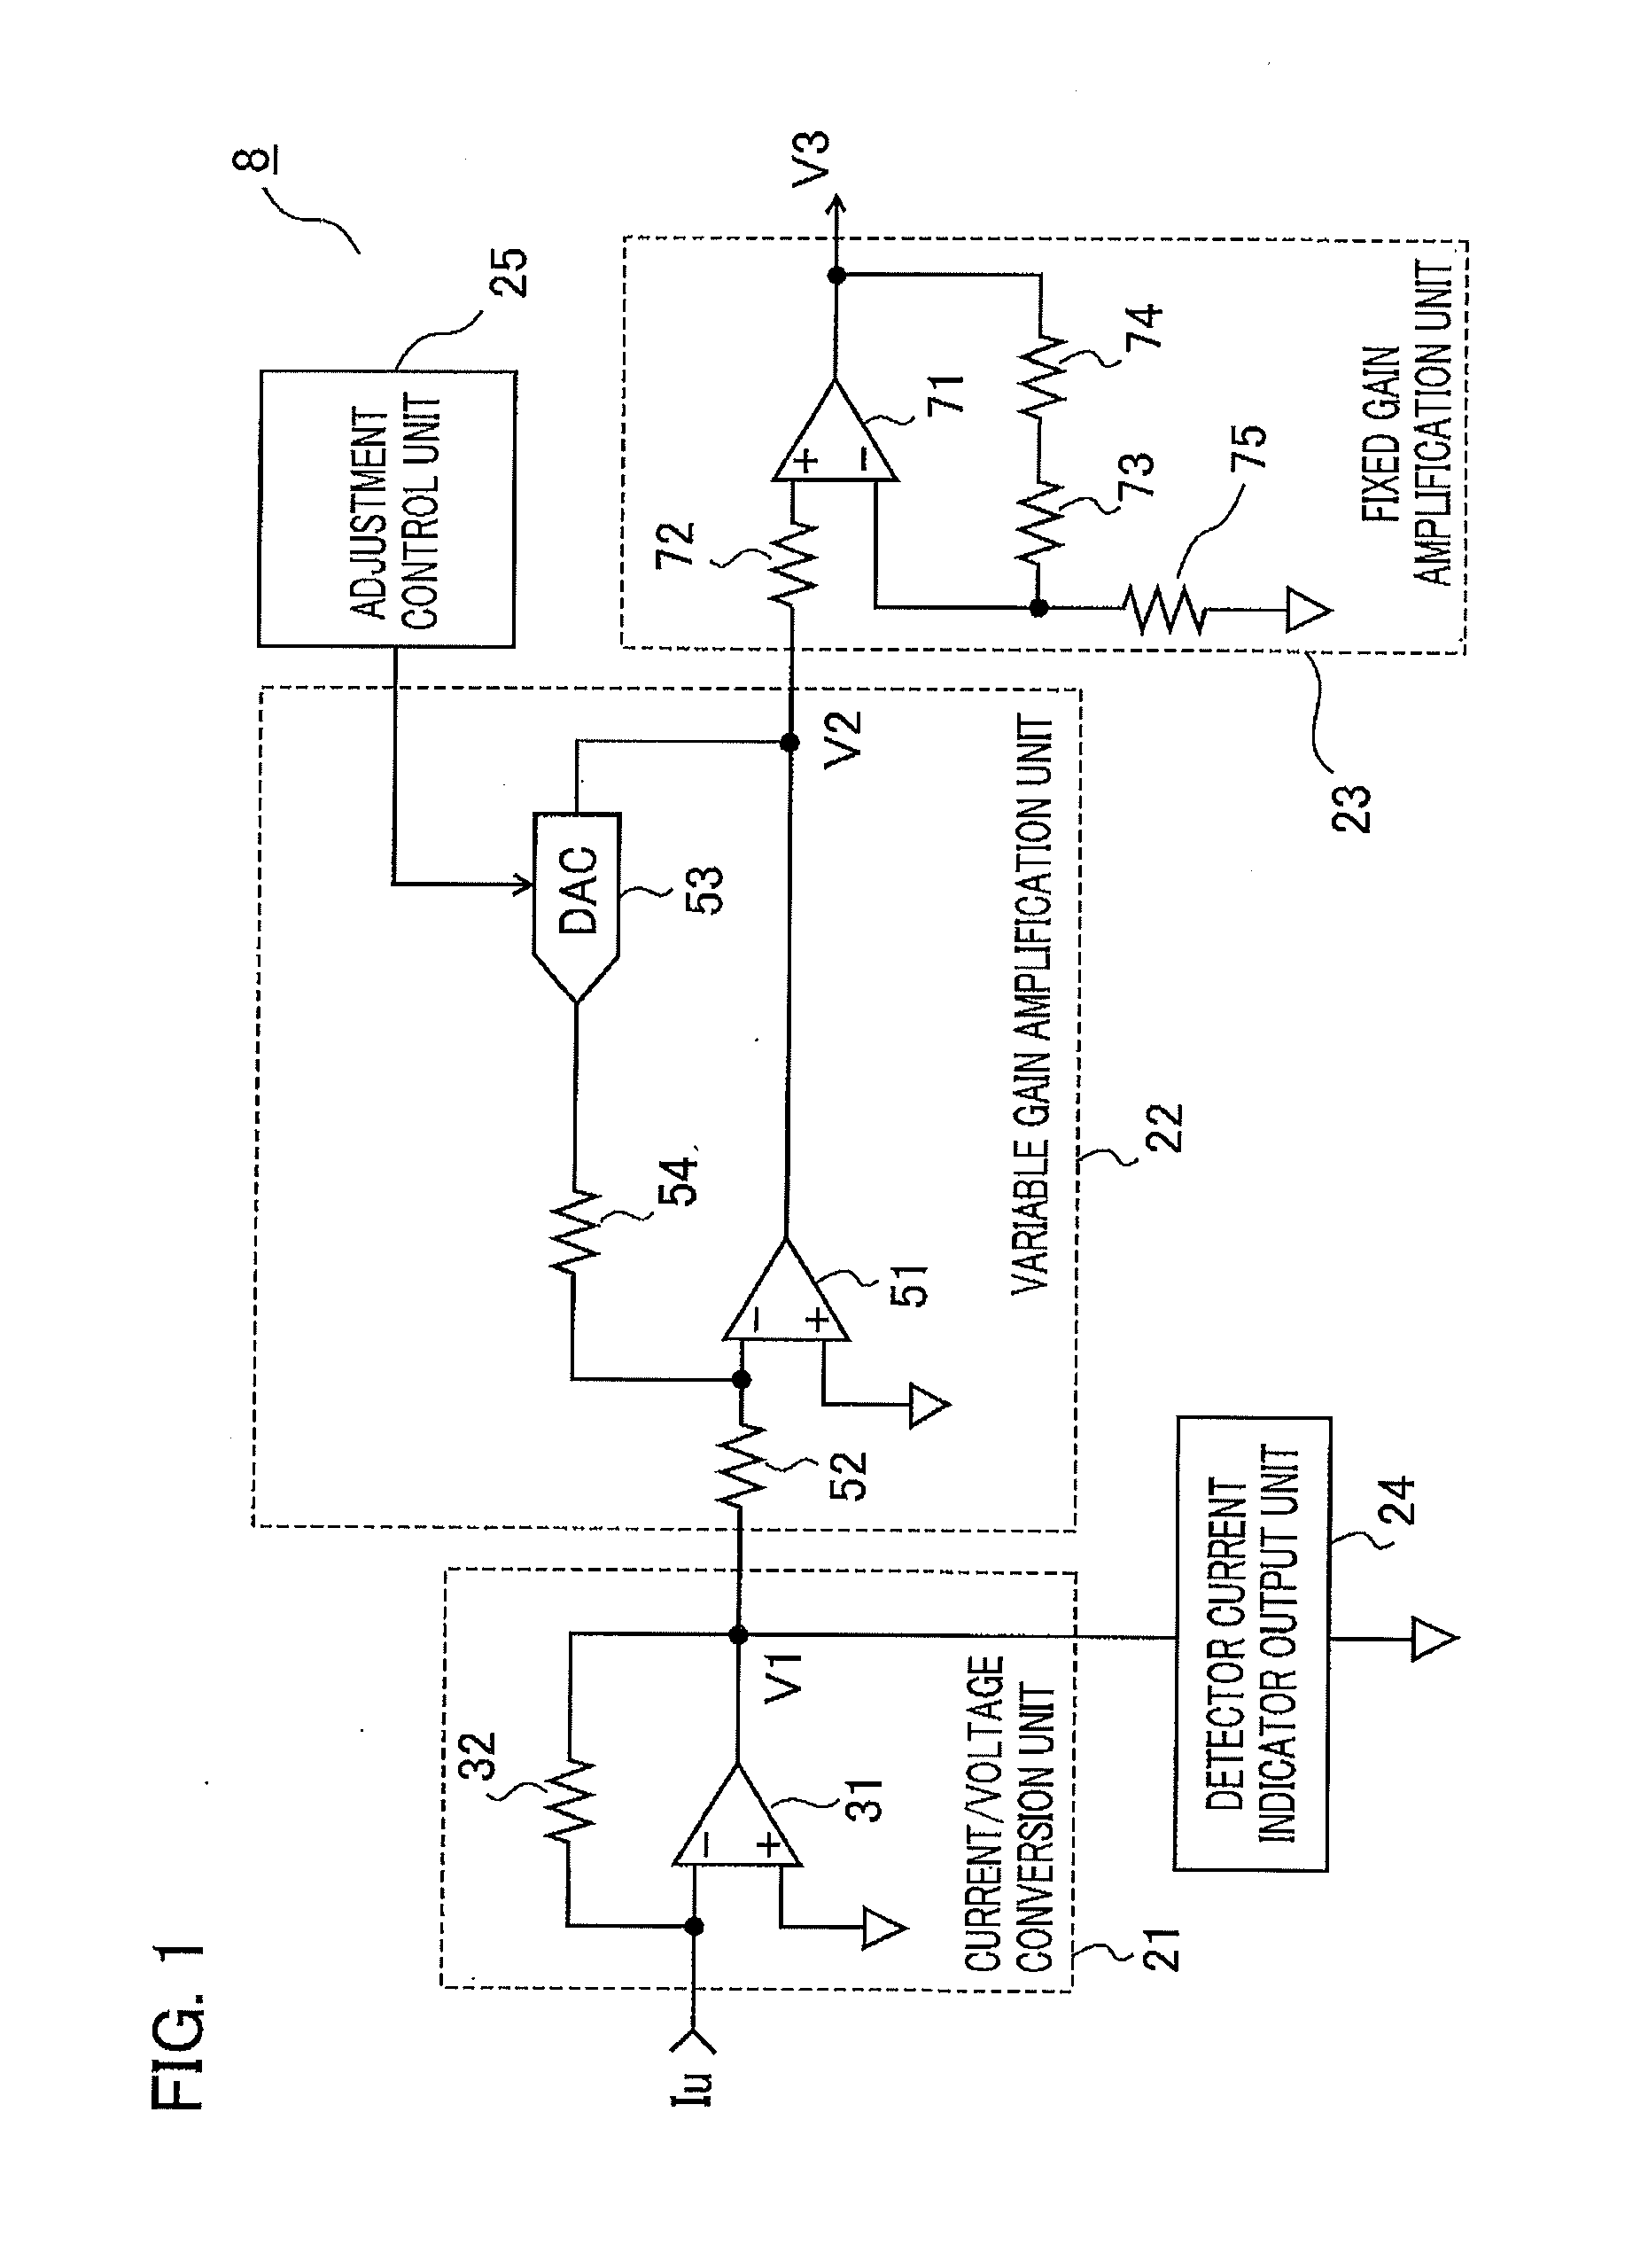 Ex-core nuclear instrumentation system